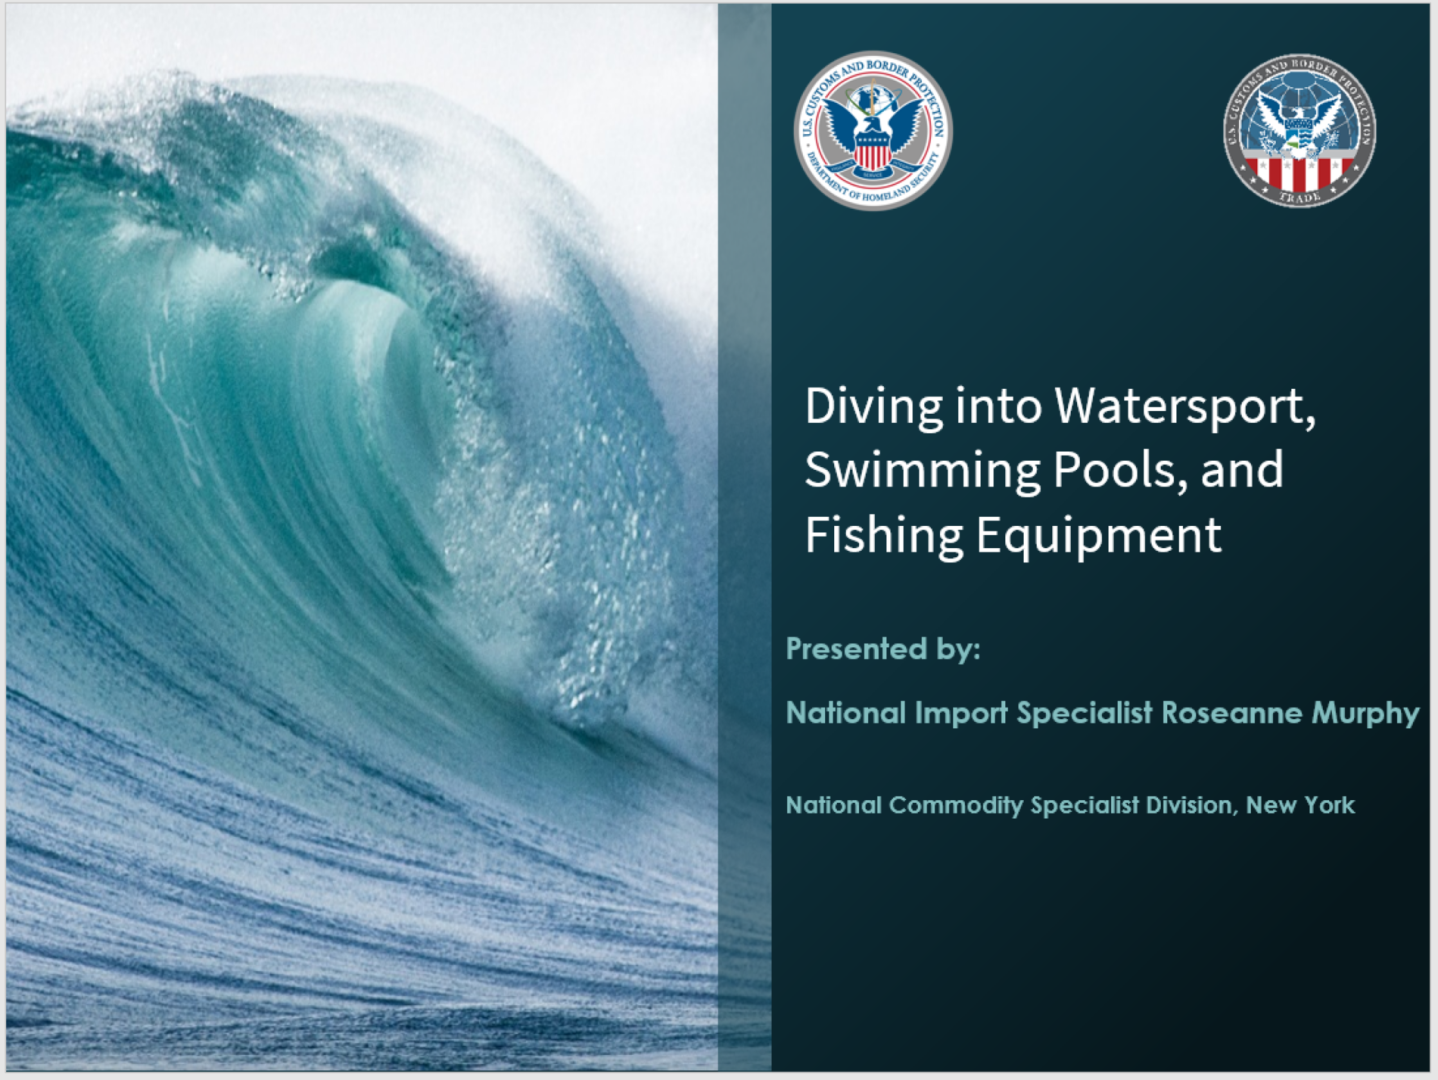 https://www.dhs.gov/medialibrary-ns-assets/prod/cbp/d/9/4/c/6/0/6/c/43160/chapter-95-diving-into-watersport-swimming-pool-and-fishing-equipment.png